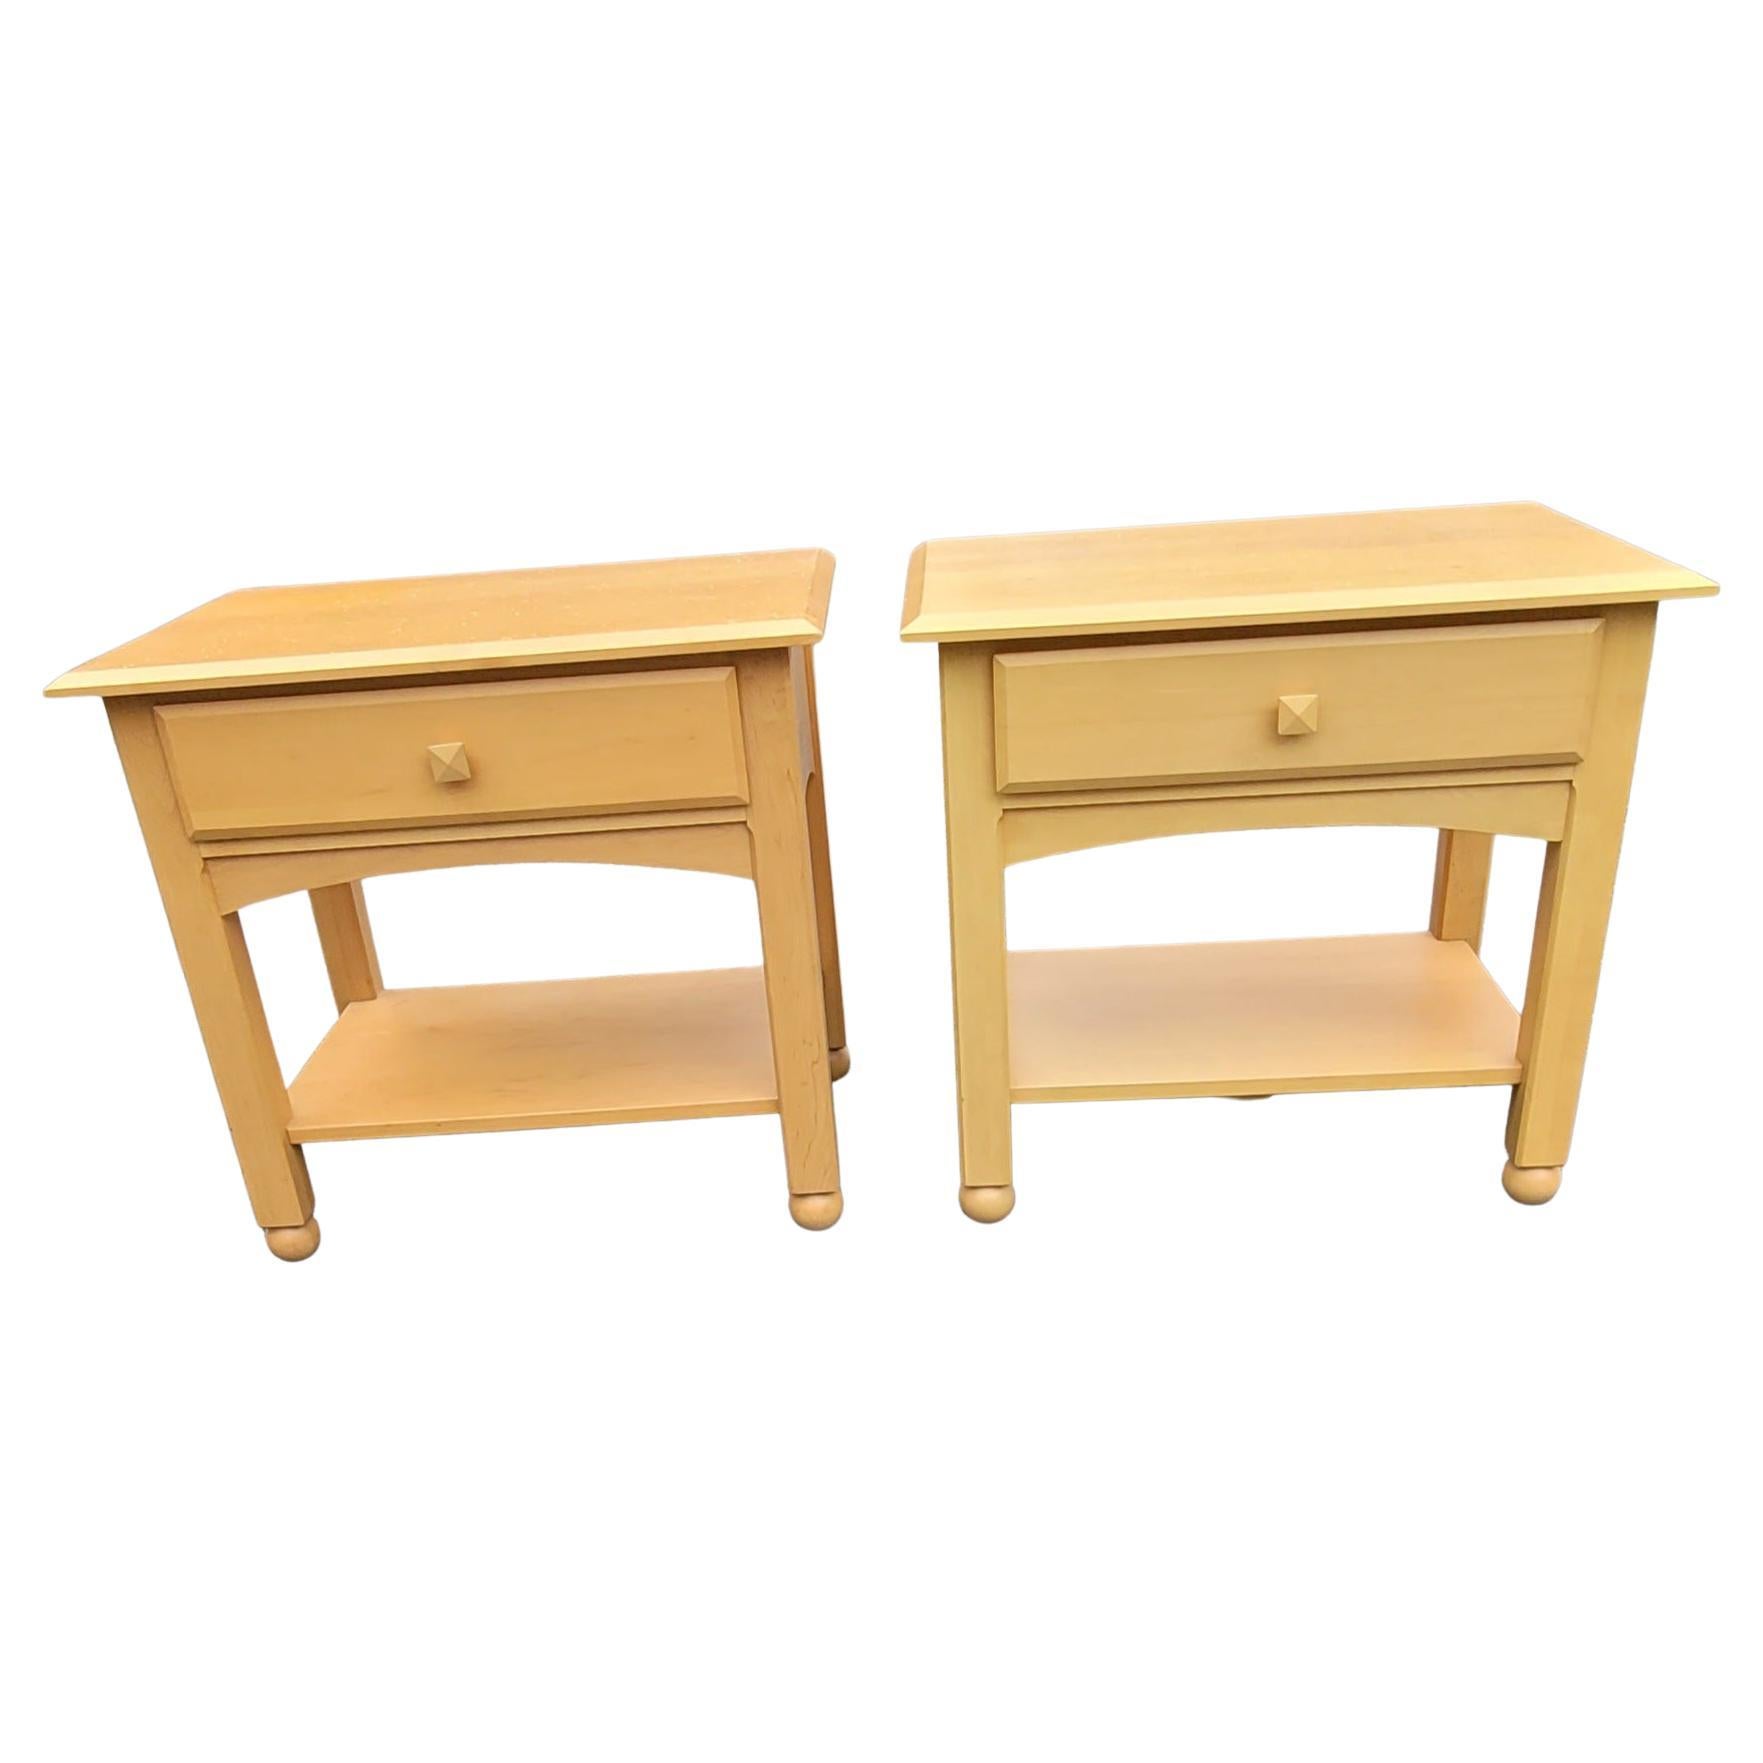 Ethan Allen American Dimensions Collection Birch Bedside Tables Nightstands